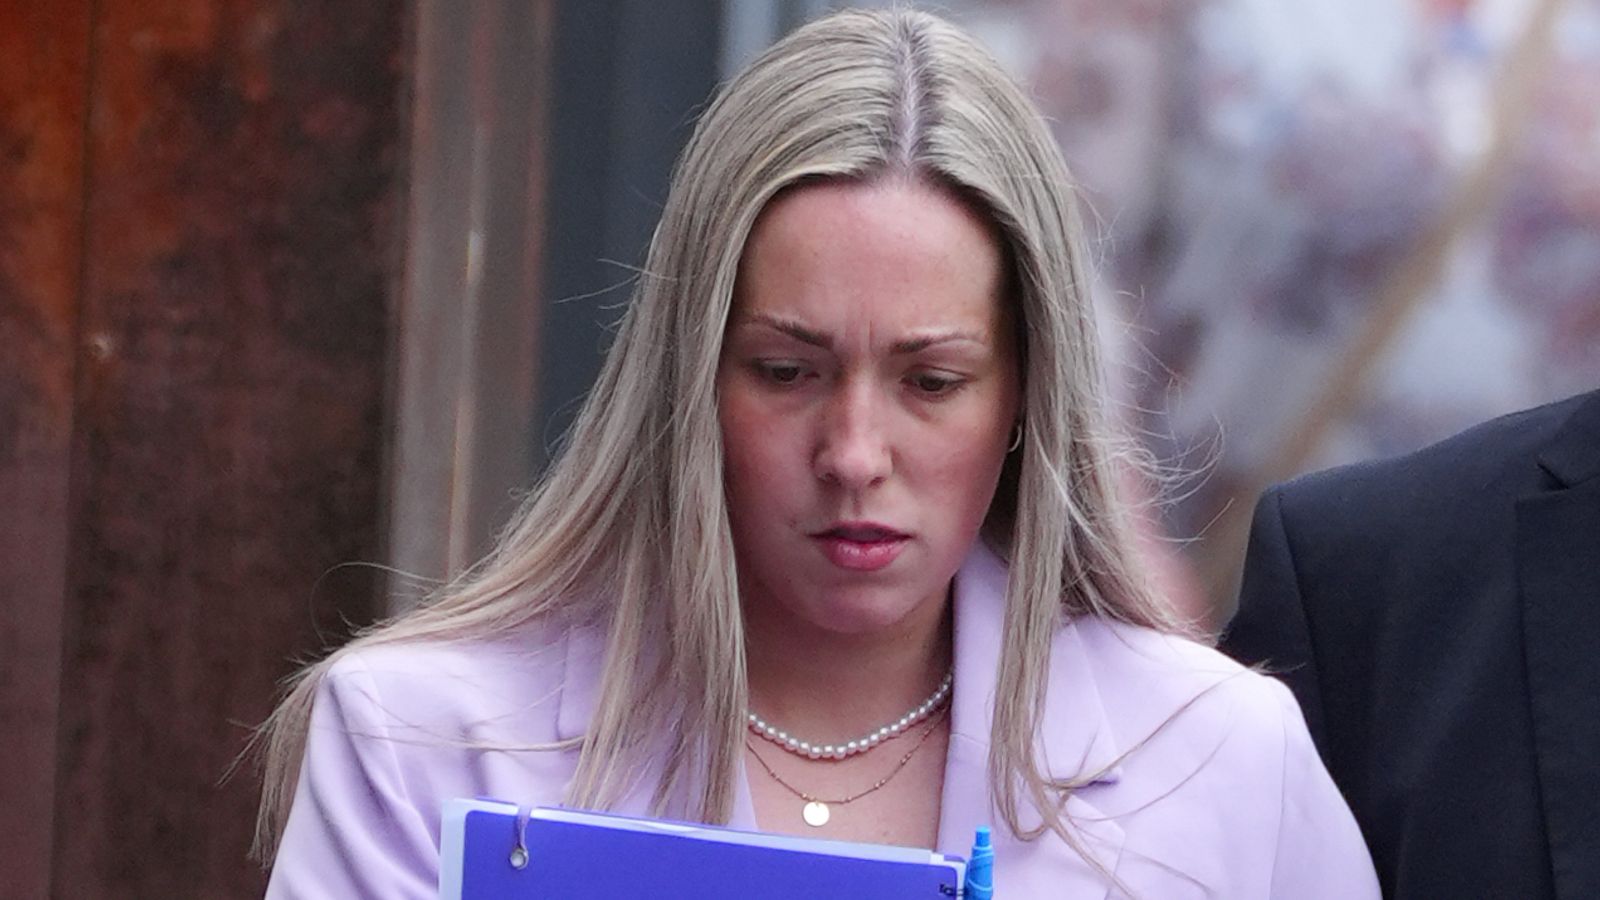 Rebecca Joynes: Teacher found guilty of sexual activity with two schoolboys